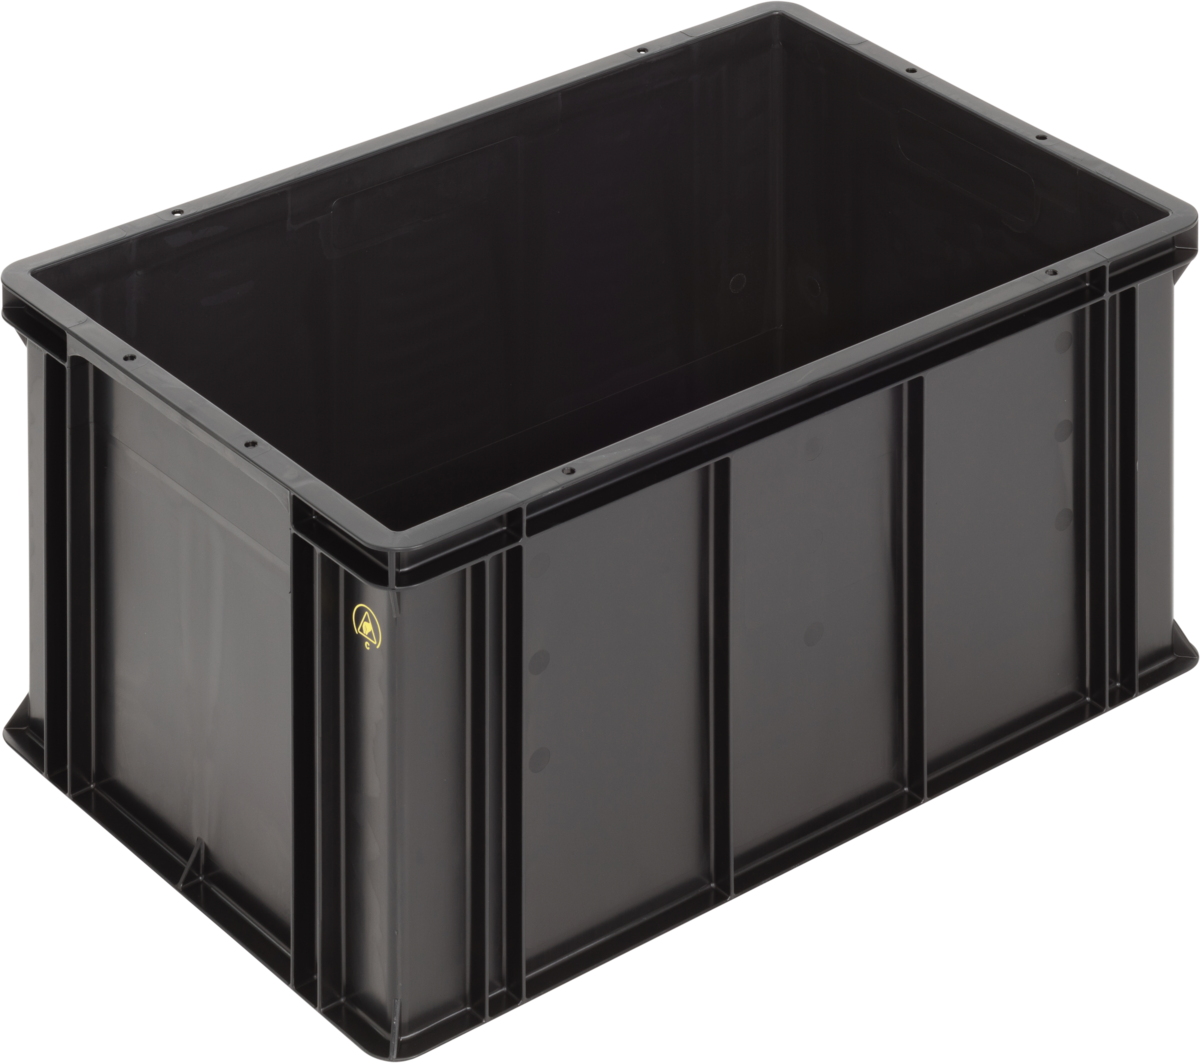 Anti-Static-ESD-Antistatic-Safe-SGL-Norm-Stacking-Bin-Containers-Flat-Base-Ref.-6432.007.992_1004519_600x400x320_01